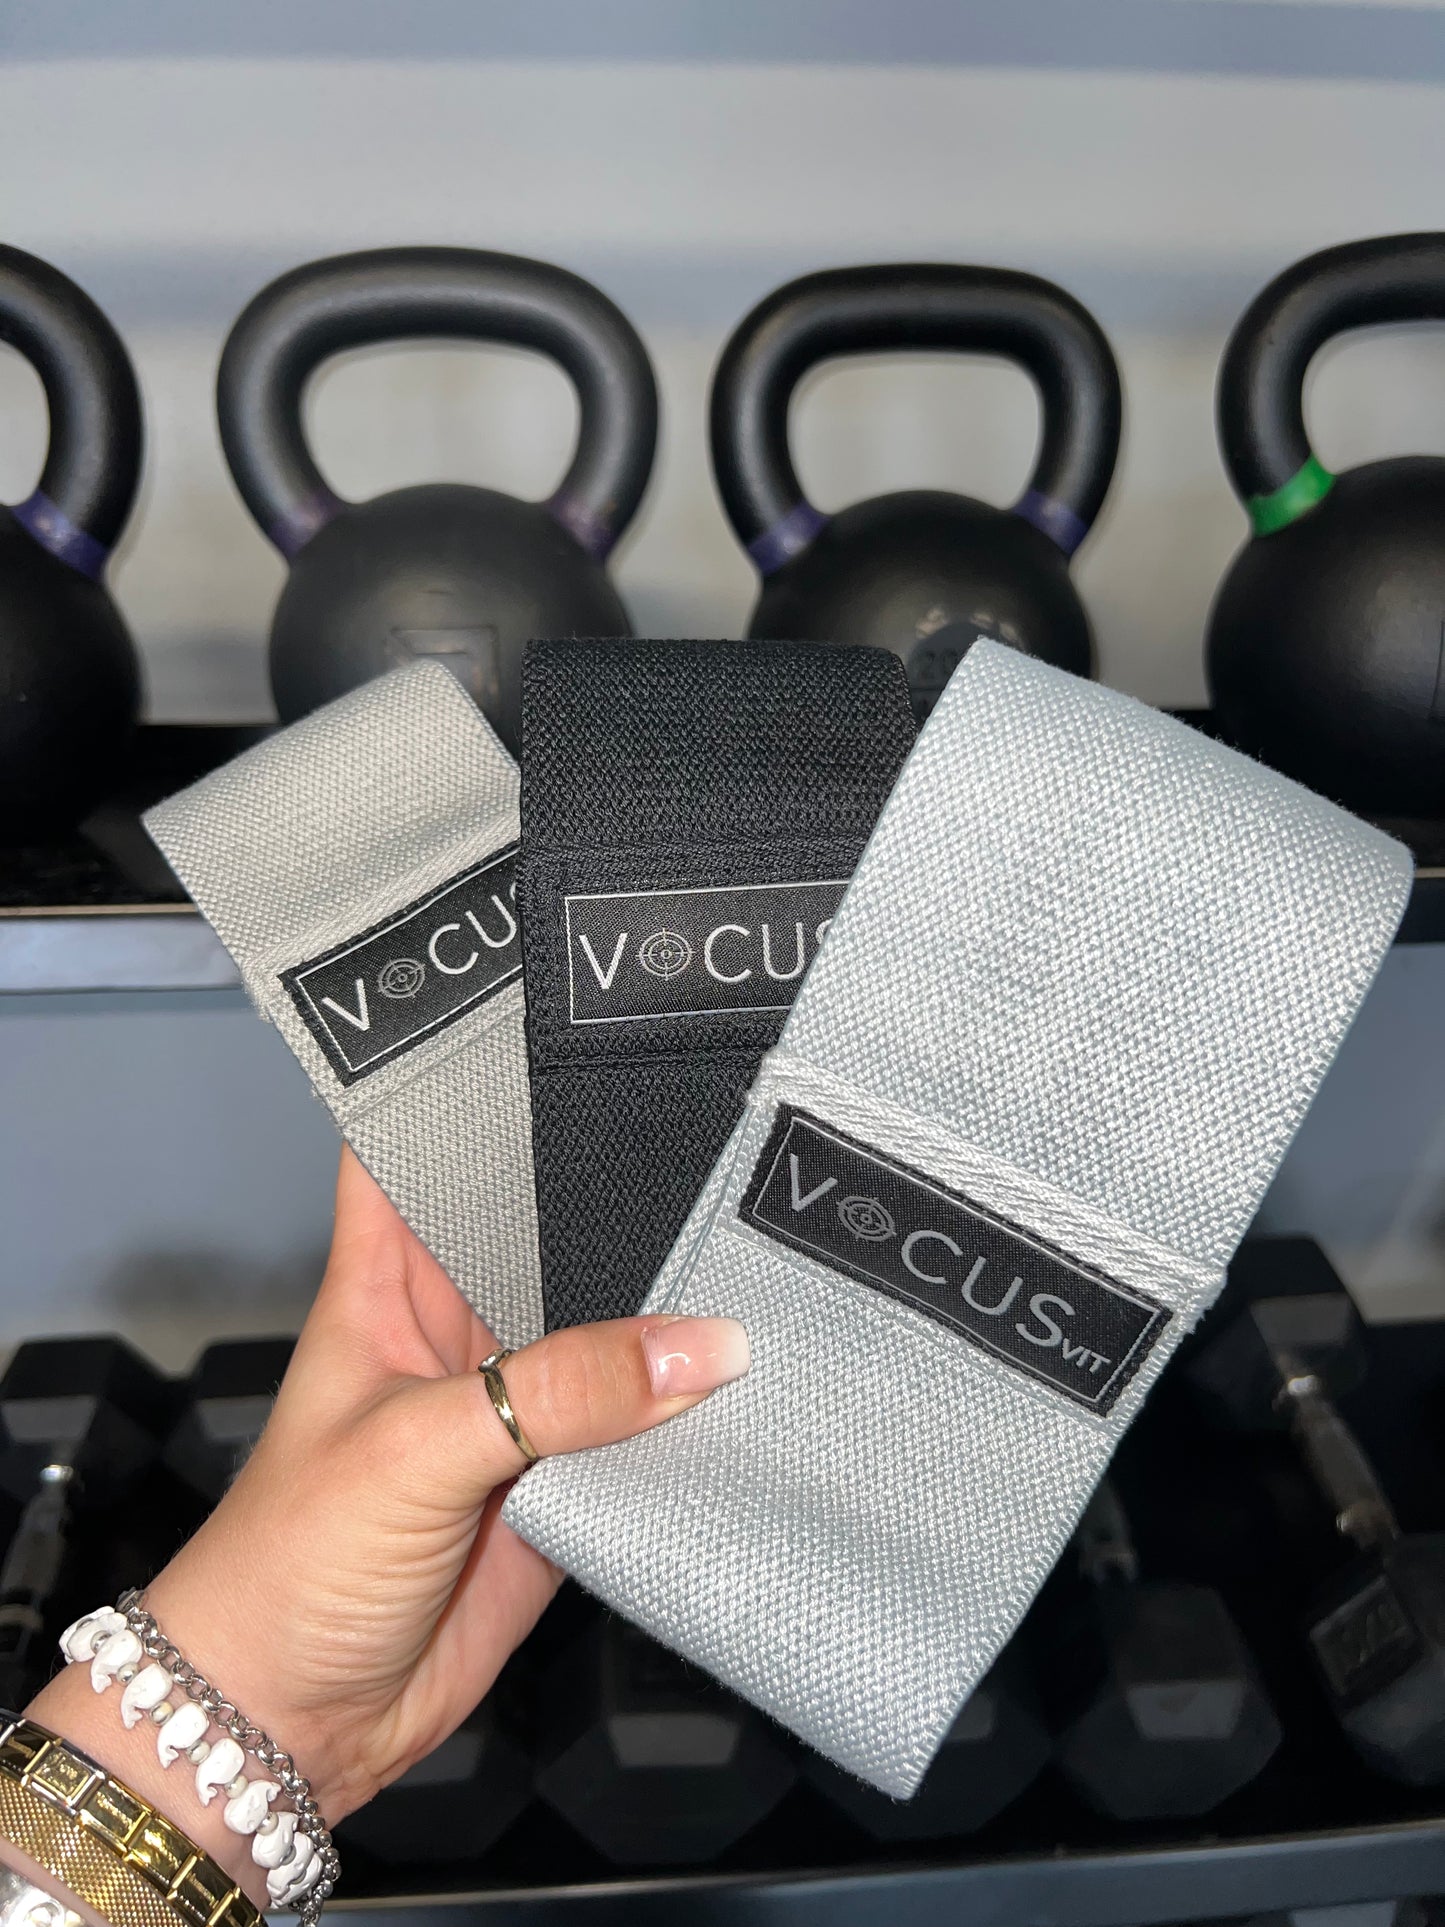 Hand holding 3 resistance bands. Light, medium and heavy resistance. Vocus Vit logo on them. Vocus vit is a sustainable women's activewear brand that uses recycled materials and ethical manufacturing. Based in Northern Ireland. Shipping worldwide.